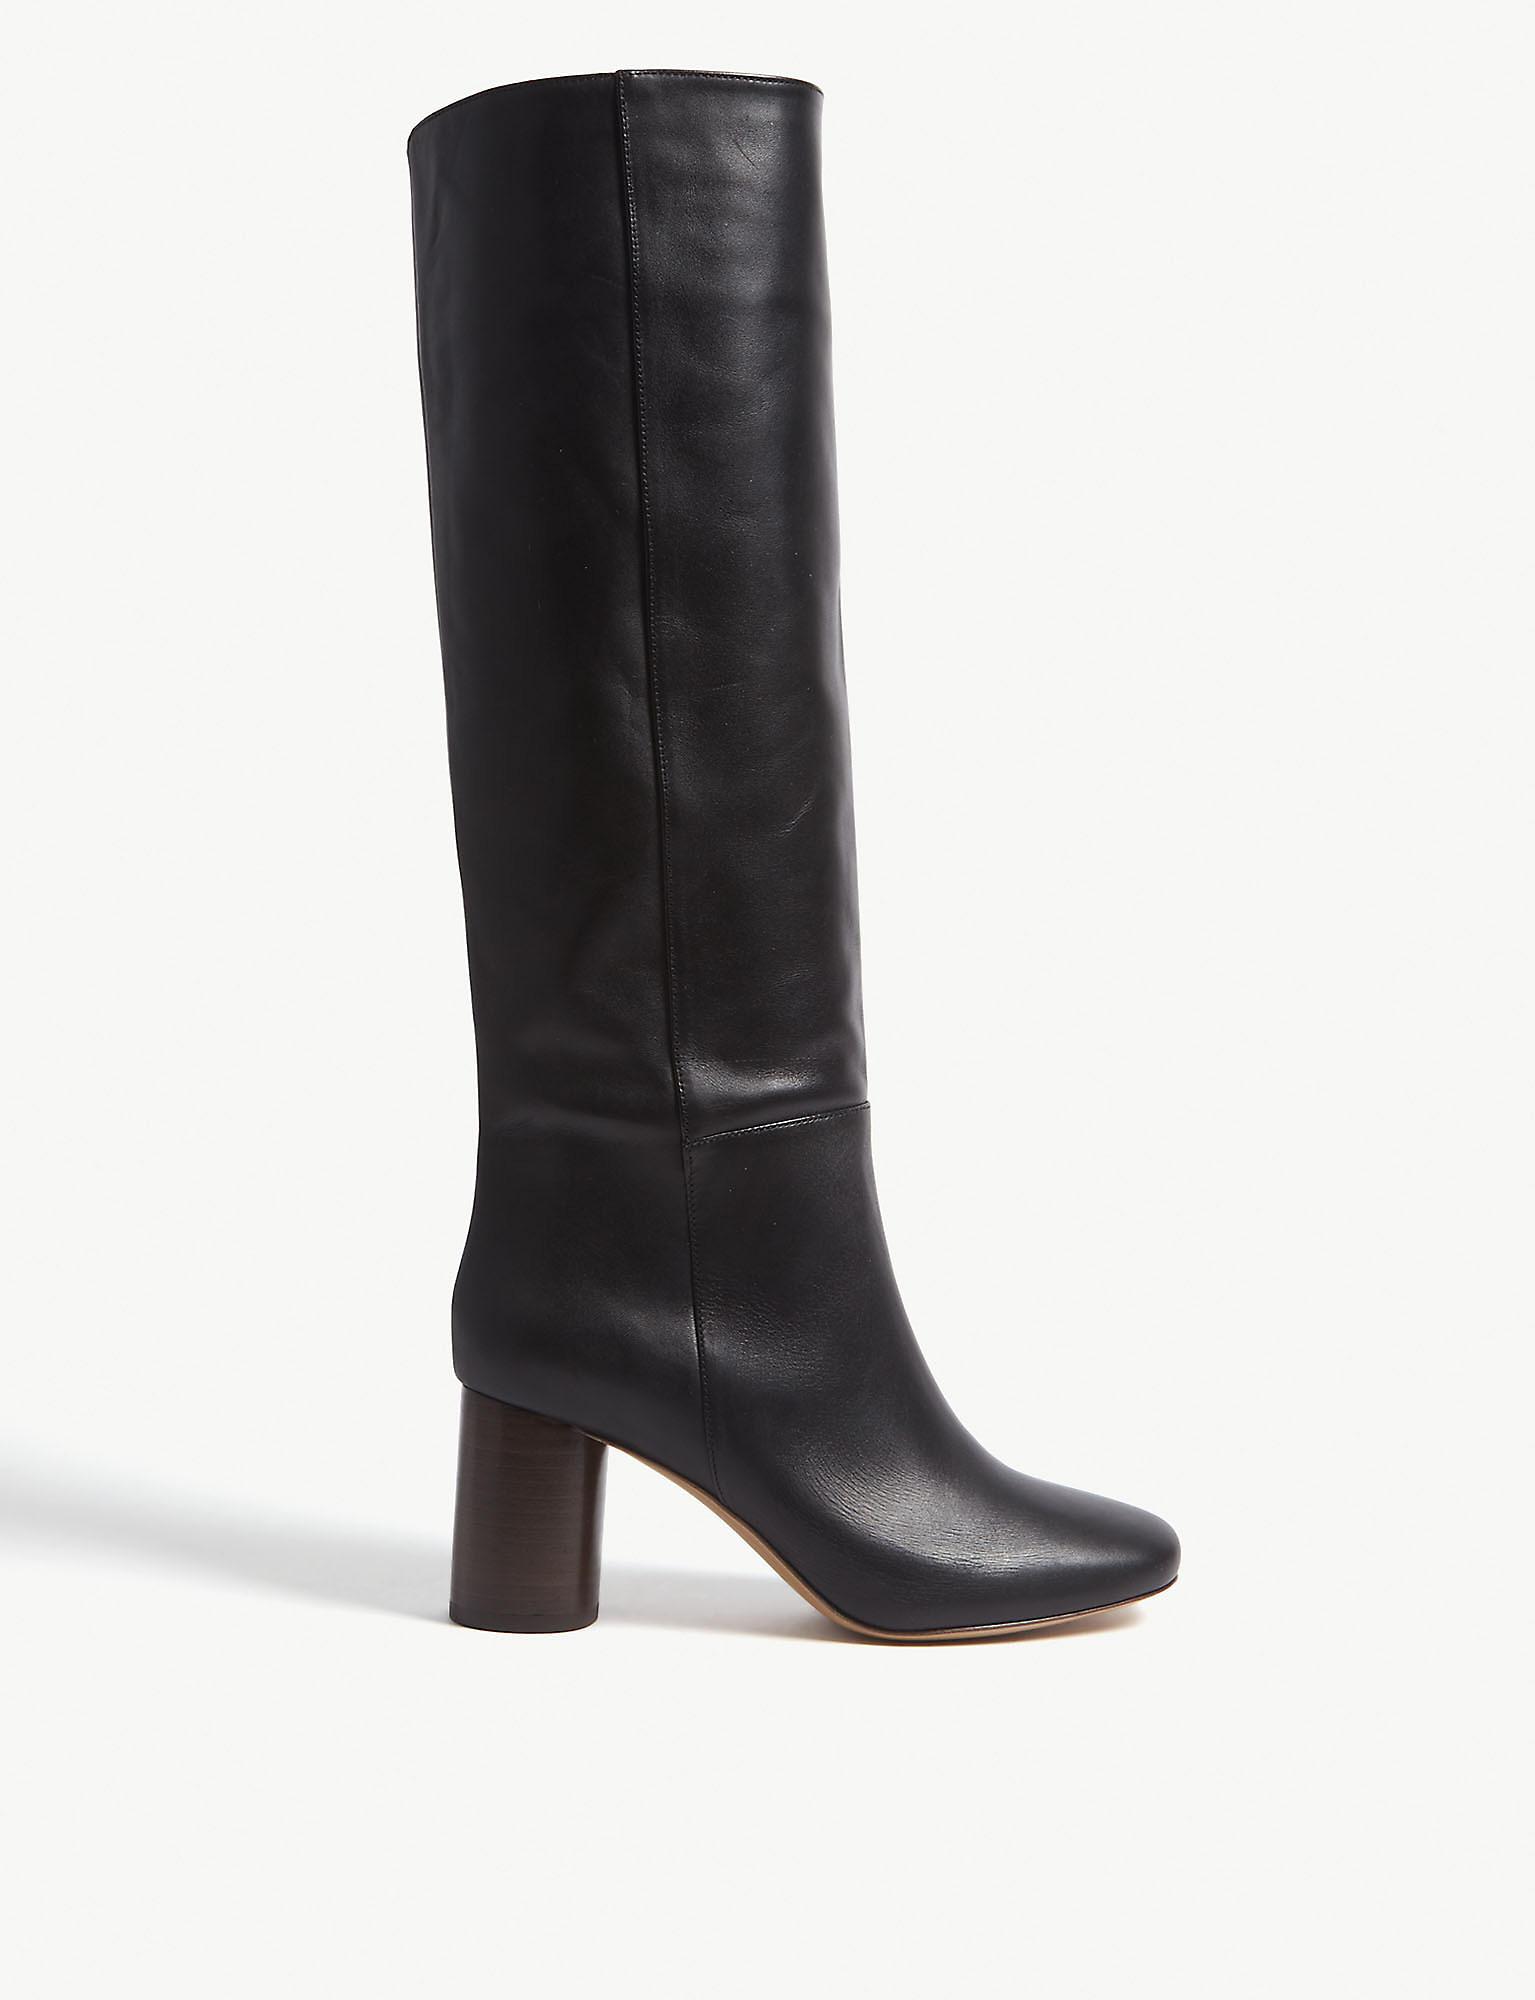 Sandro Leather Boots Black - Lyst